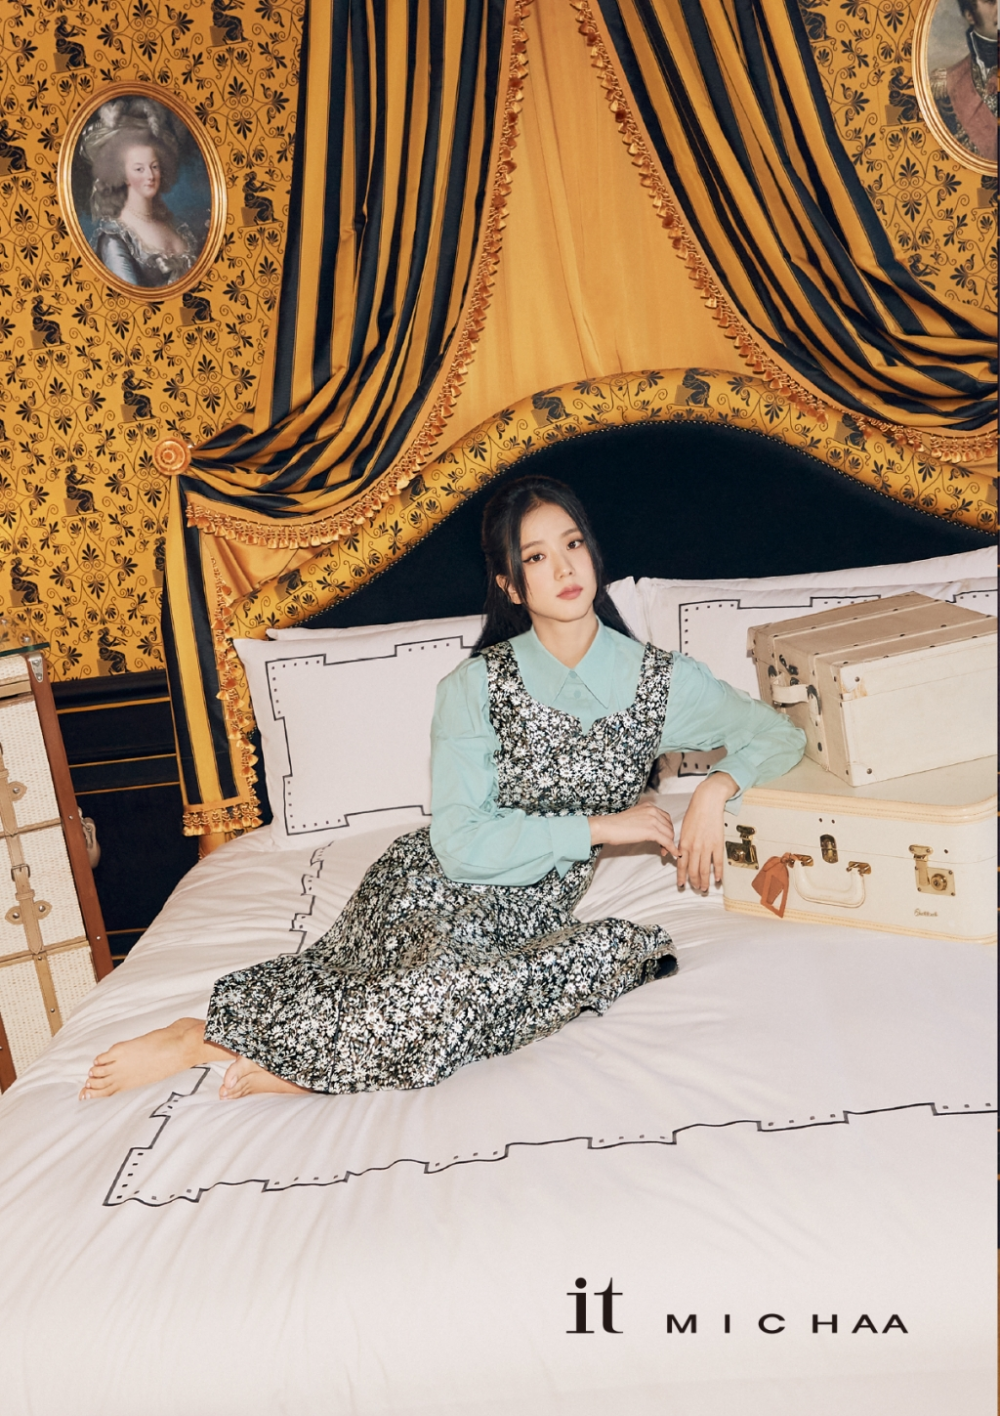 BLACKPINK's Jisoo in the latest pictorial for 'it MICHAA'